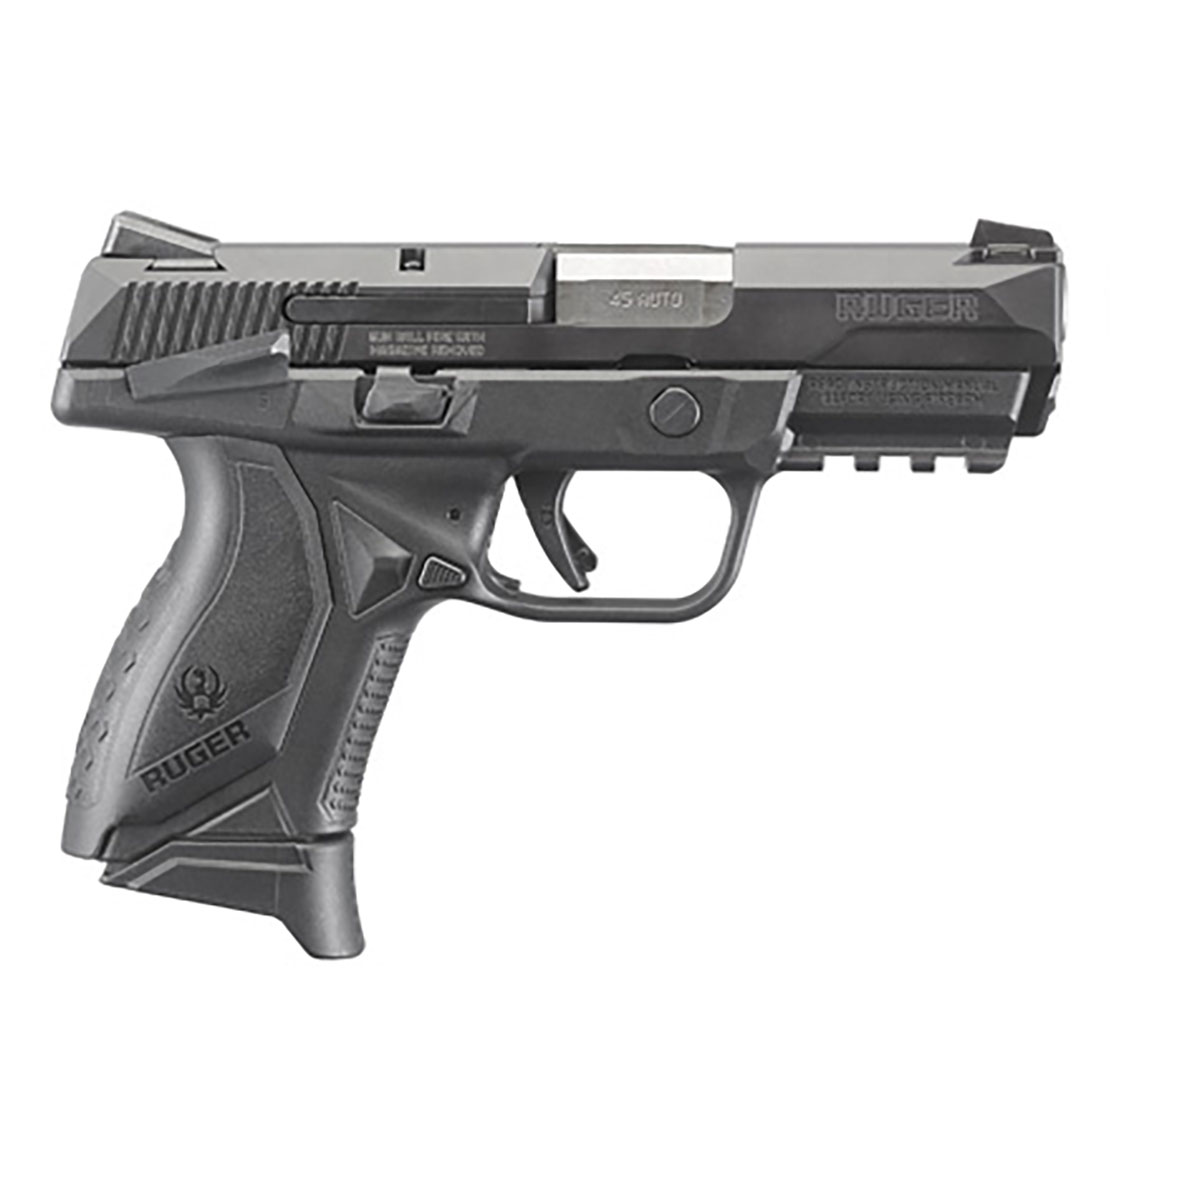 RUGER - RUGER AMERICAN COMPACT 45 ACP SEMI-AUTO HANDGUN